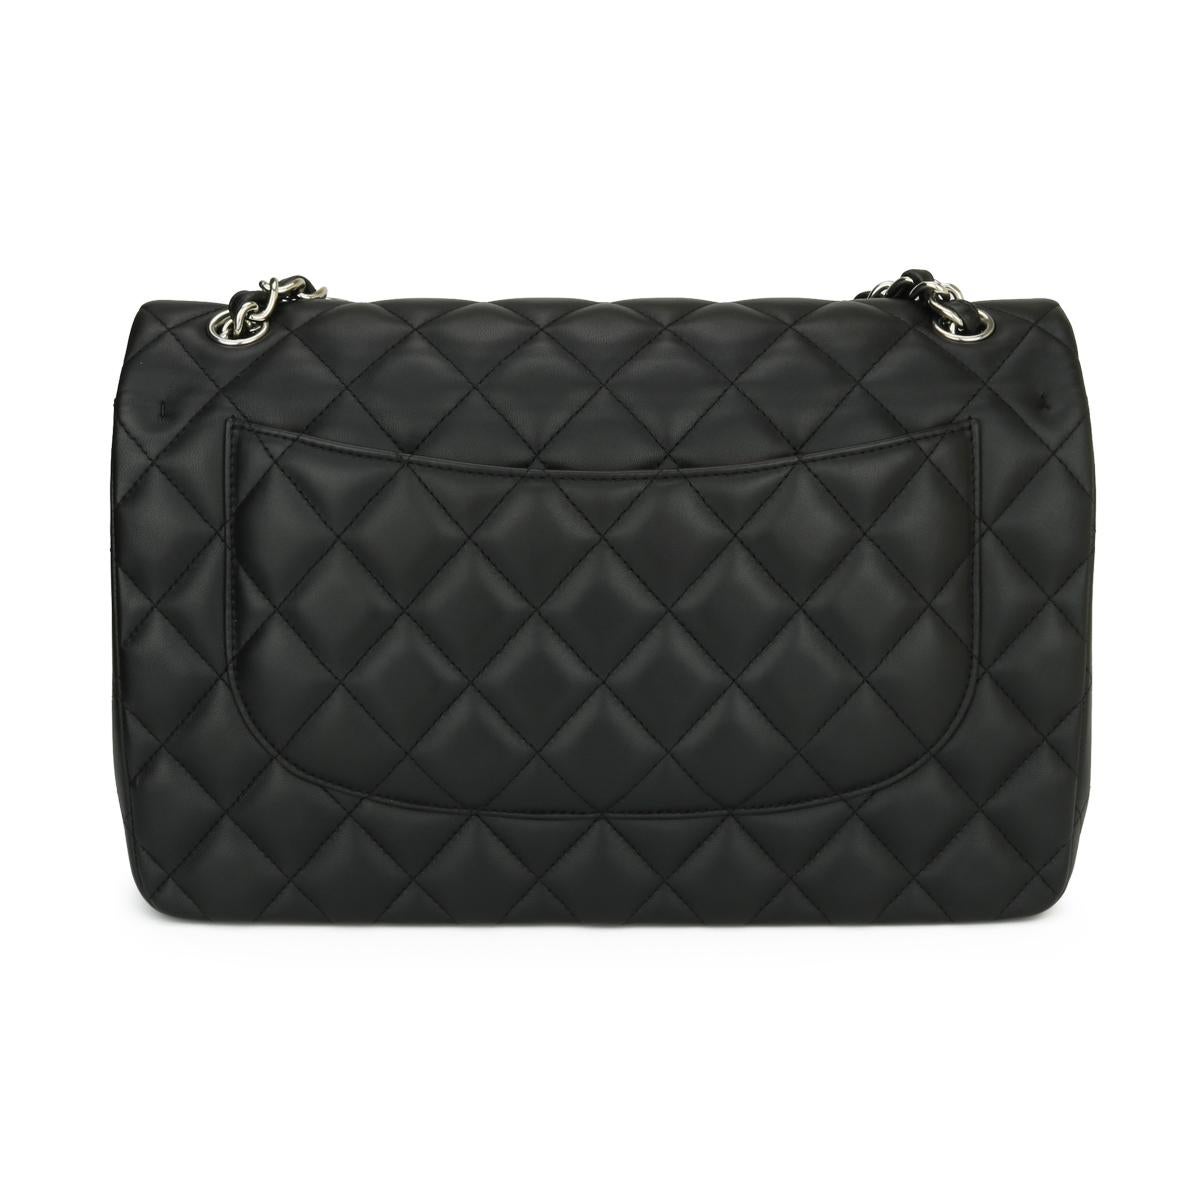 CHANEL Classic Double Flap Jumbo Bag Black Lambskin with Silver Hardware 2016.

This stunning bag is in excellent condition, the bag still holds its original shape, and the hardware is still very shiny.

- Exterior Condition: Excellent condition.